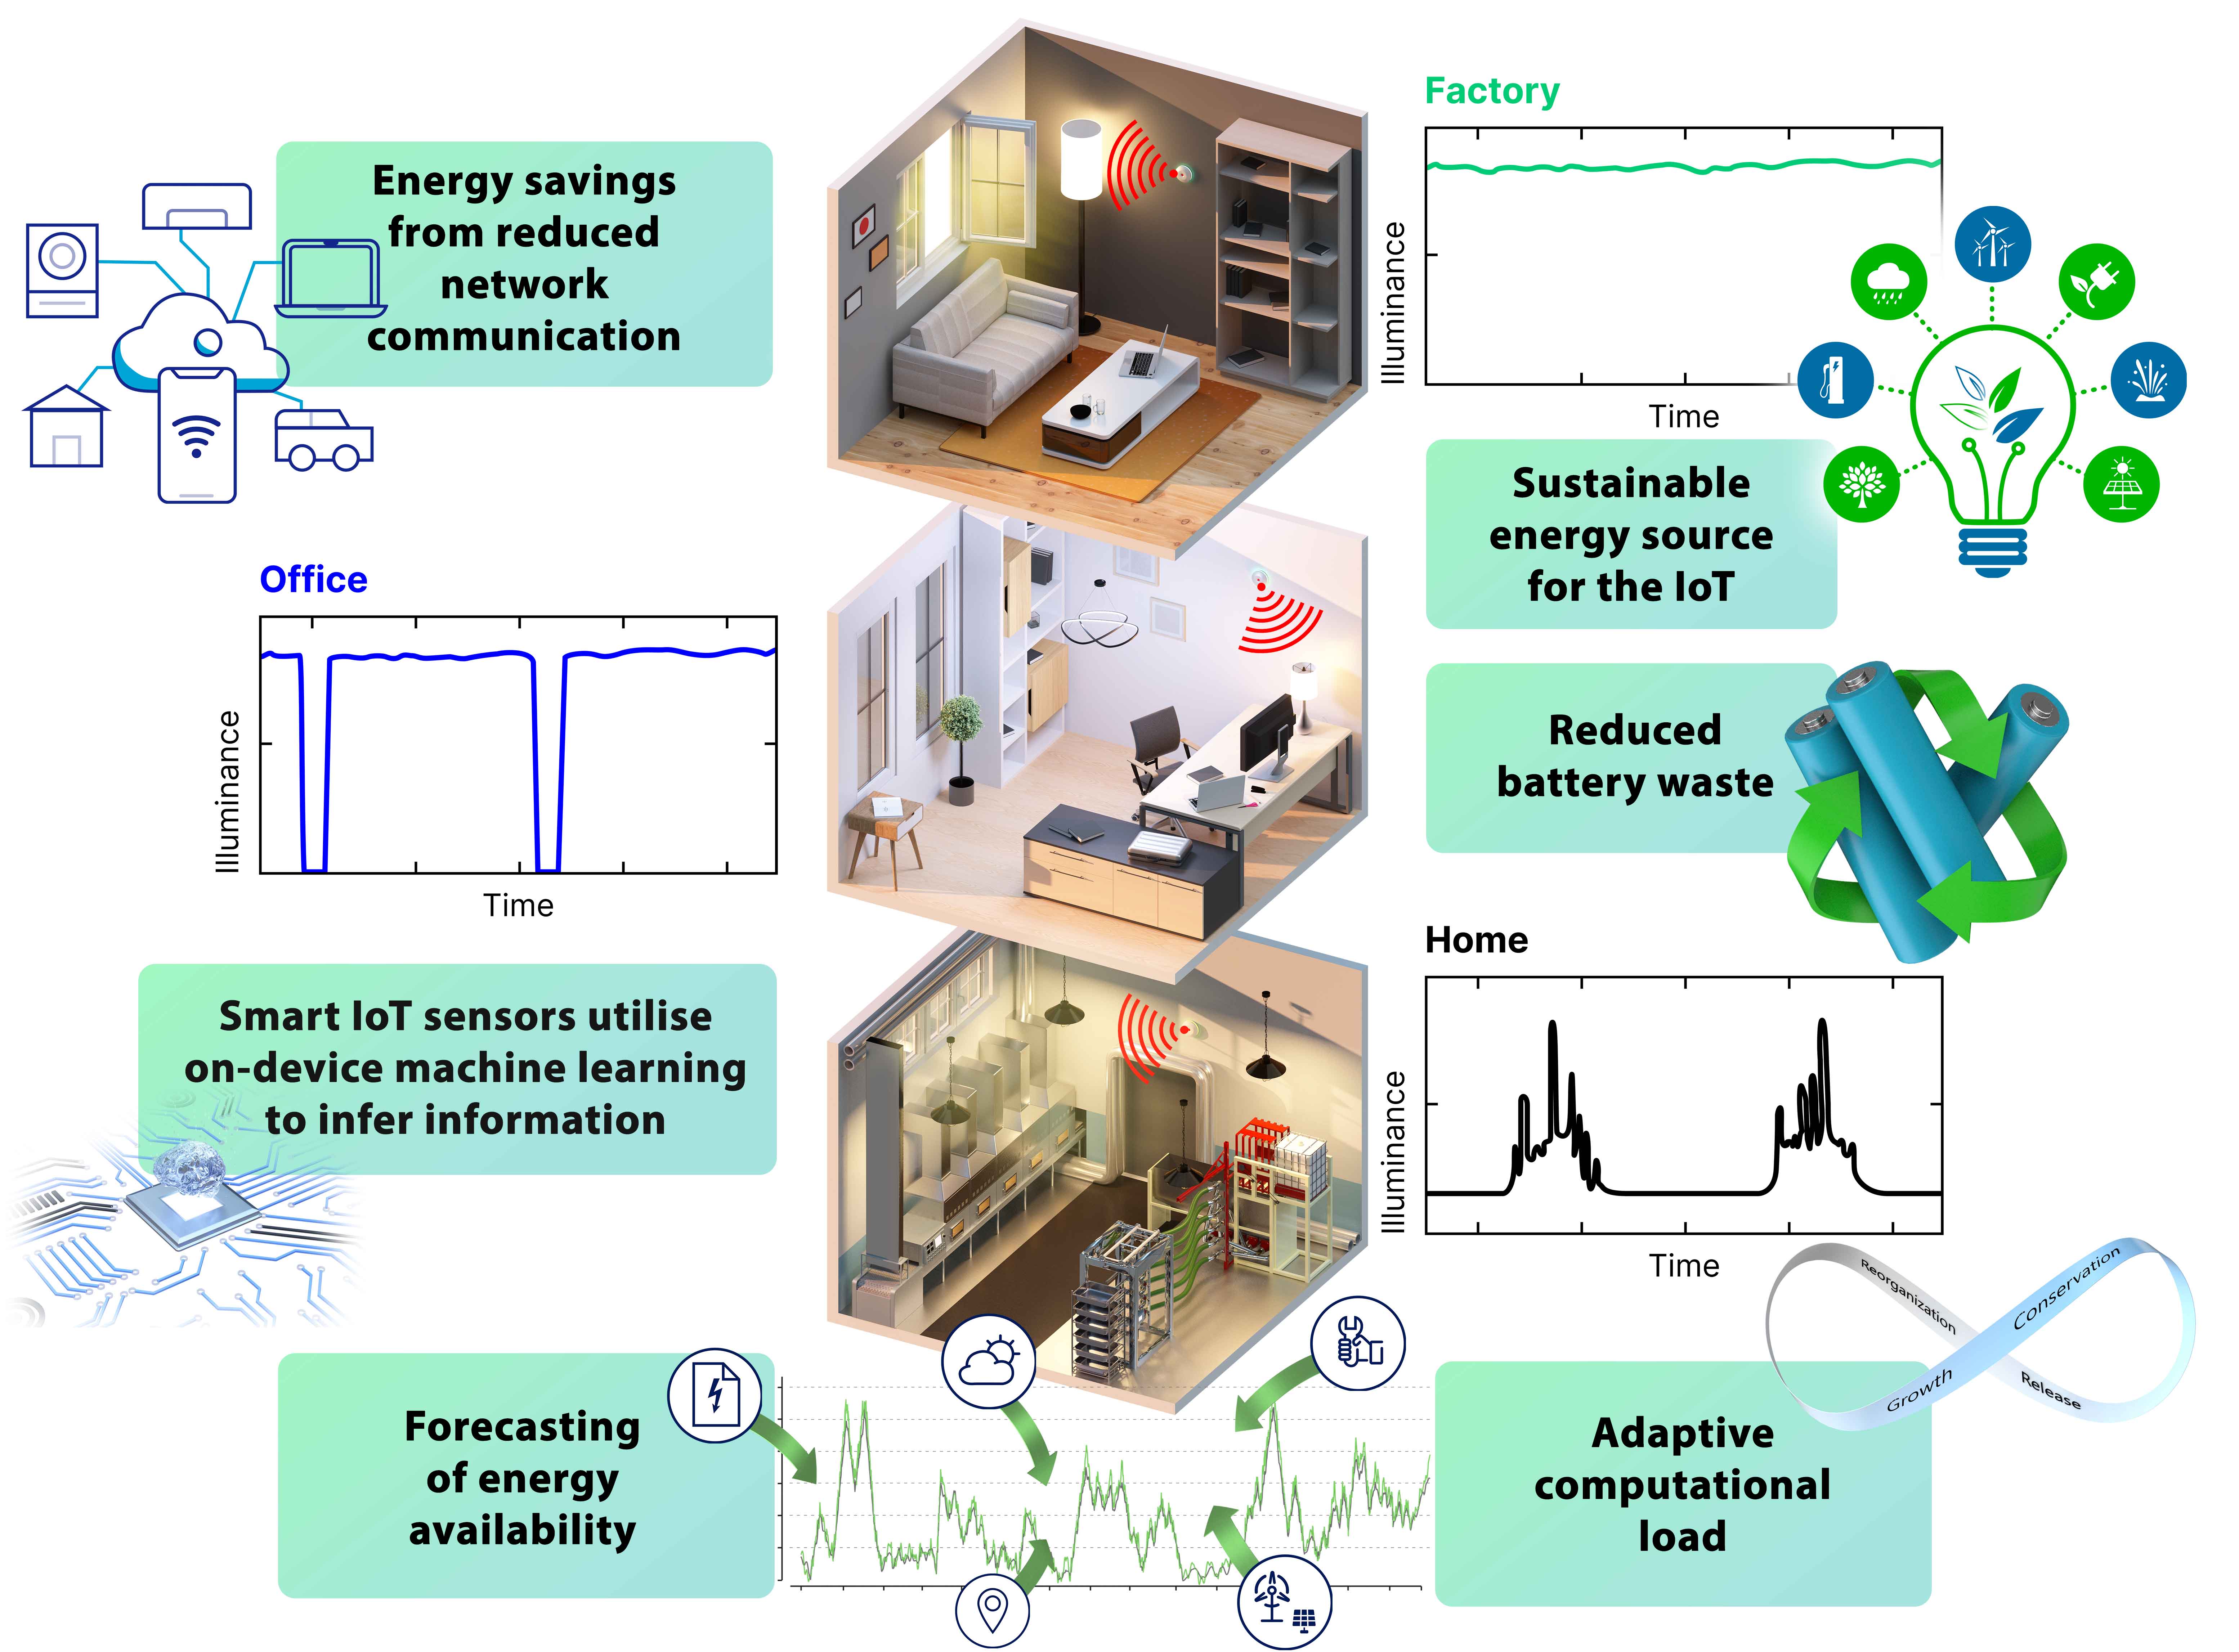 Harvesting energy from ambient light and artificial intelligence revolutionise the Internet of Things. Based on smart and adaptive operation, the energy consumption of sensor devices is reduced, and battery waste is avoided